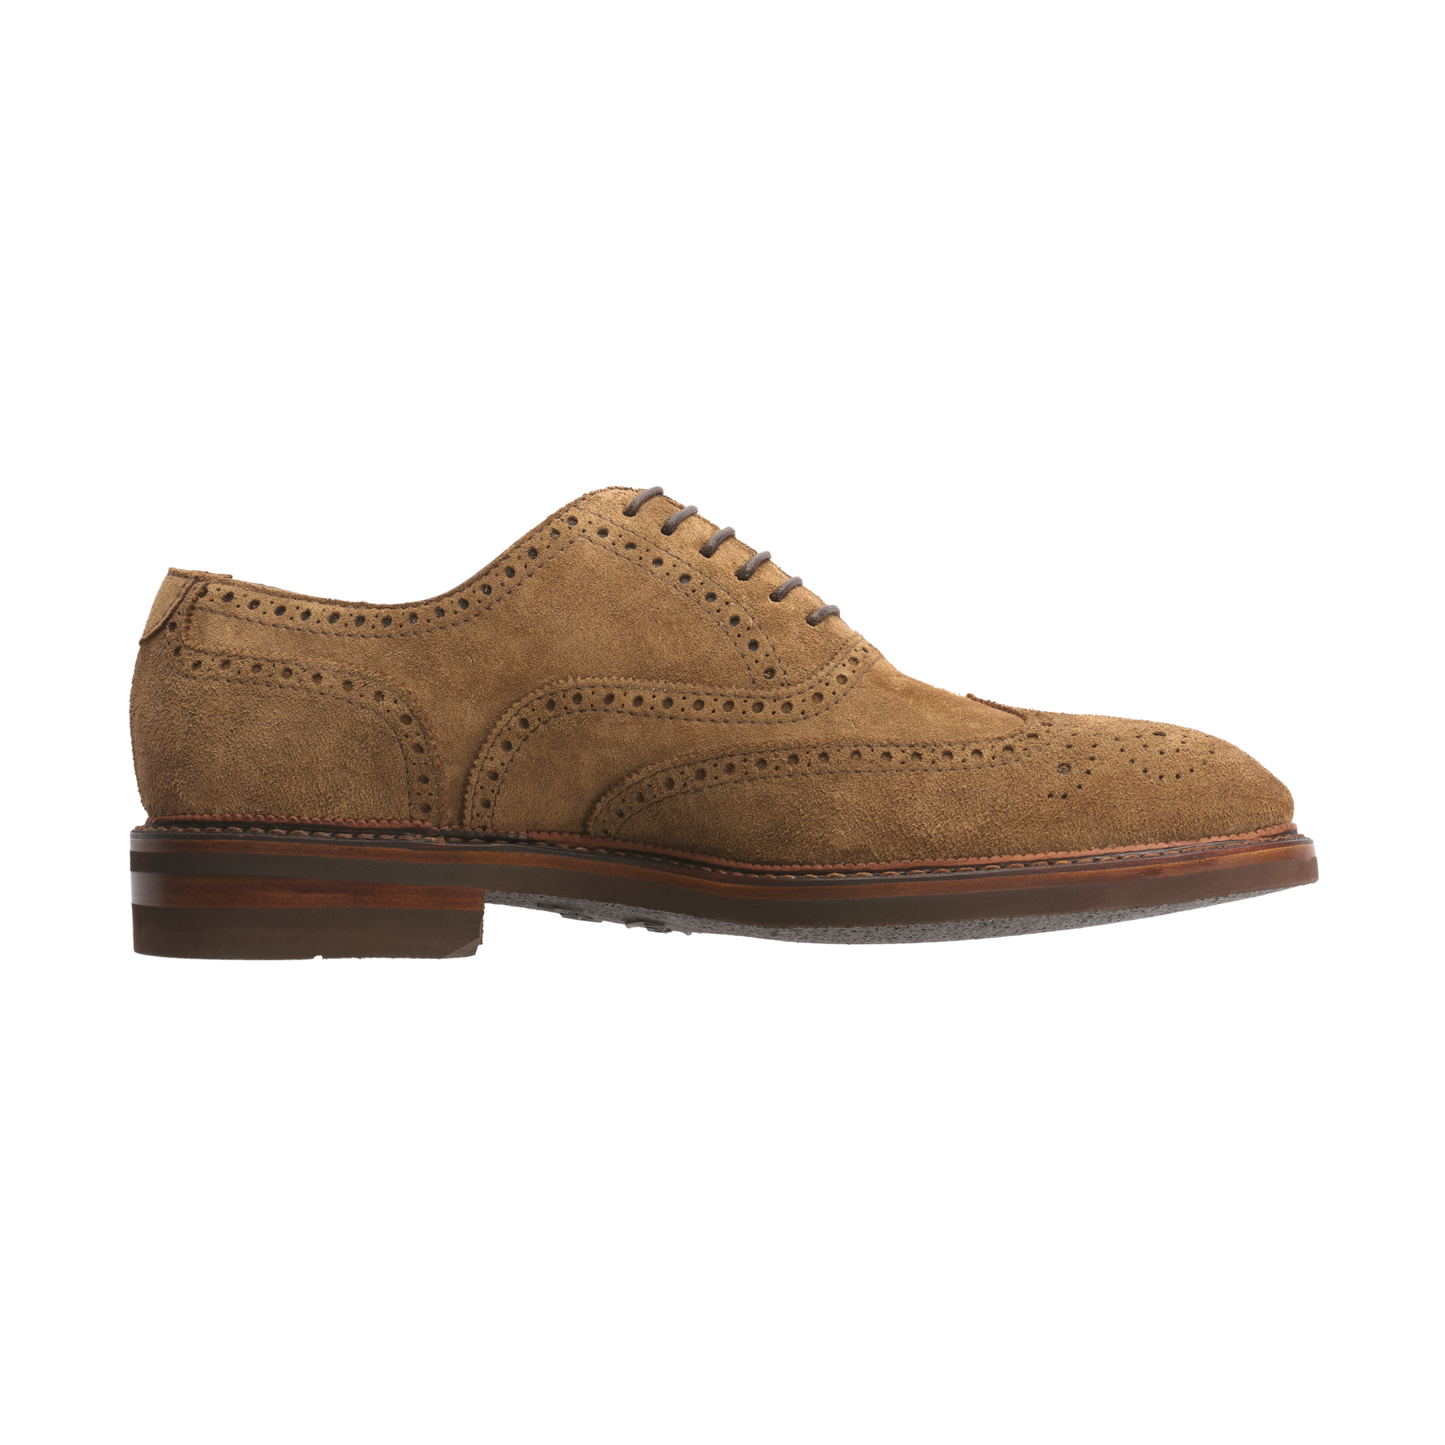 Bontoni «Libertino» Six-Eyelet Oxford Shoes with Perforated Details and ...